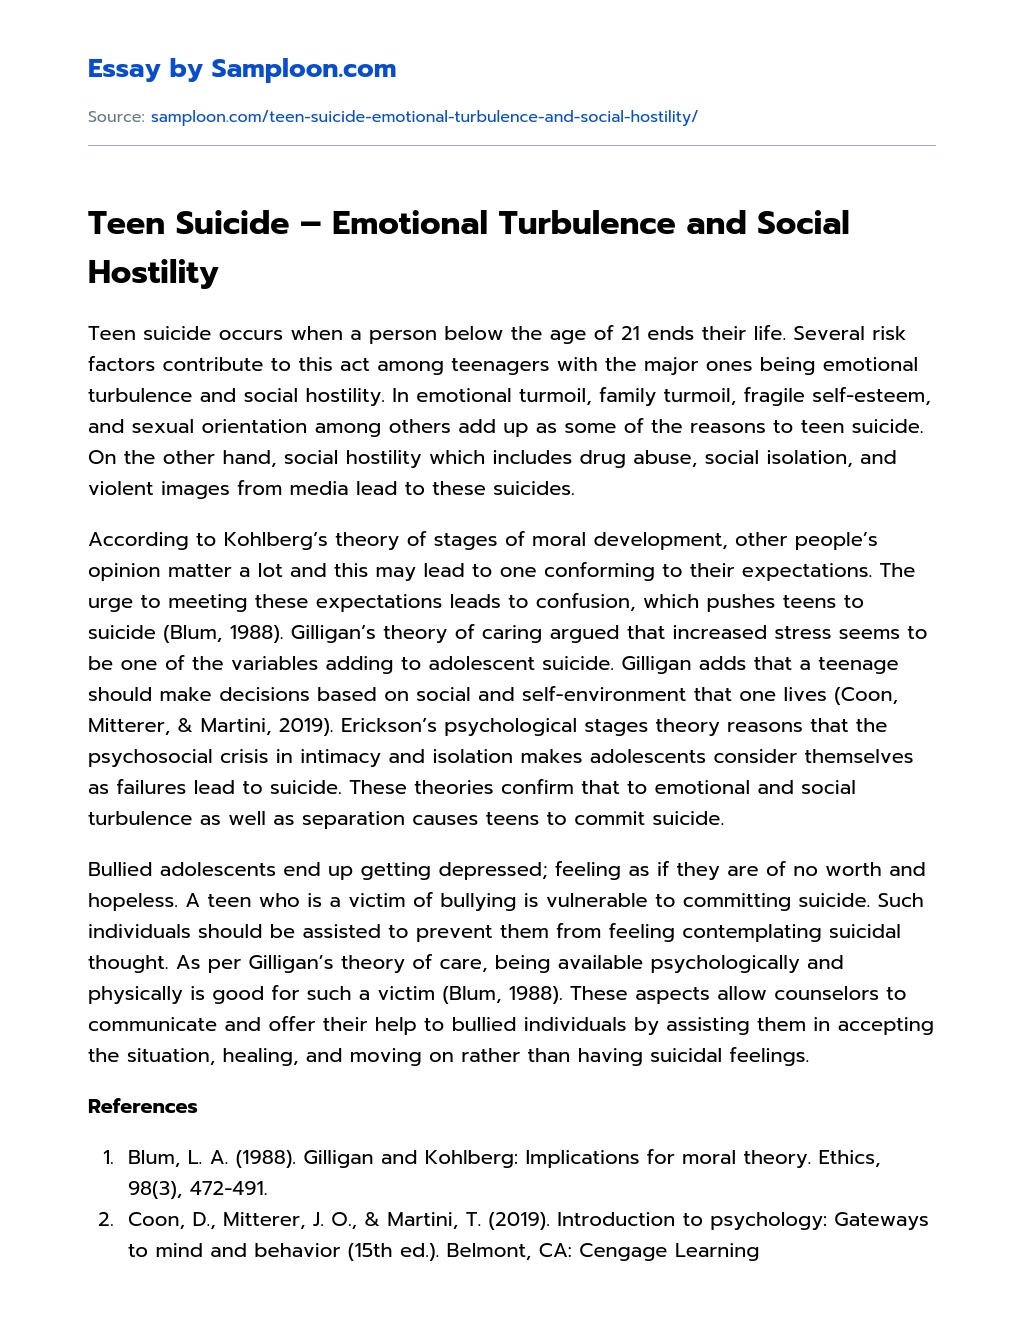 Teen Suicide – Emotional Turbulence and Social Hostility essay